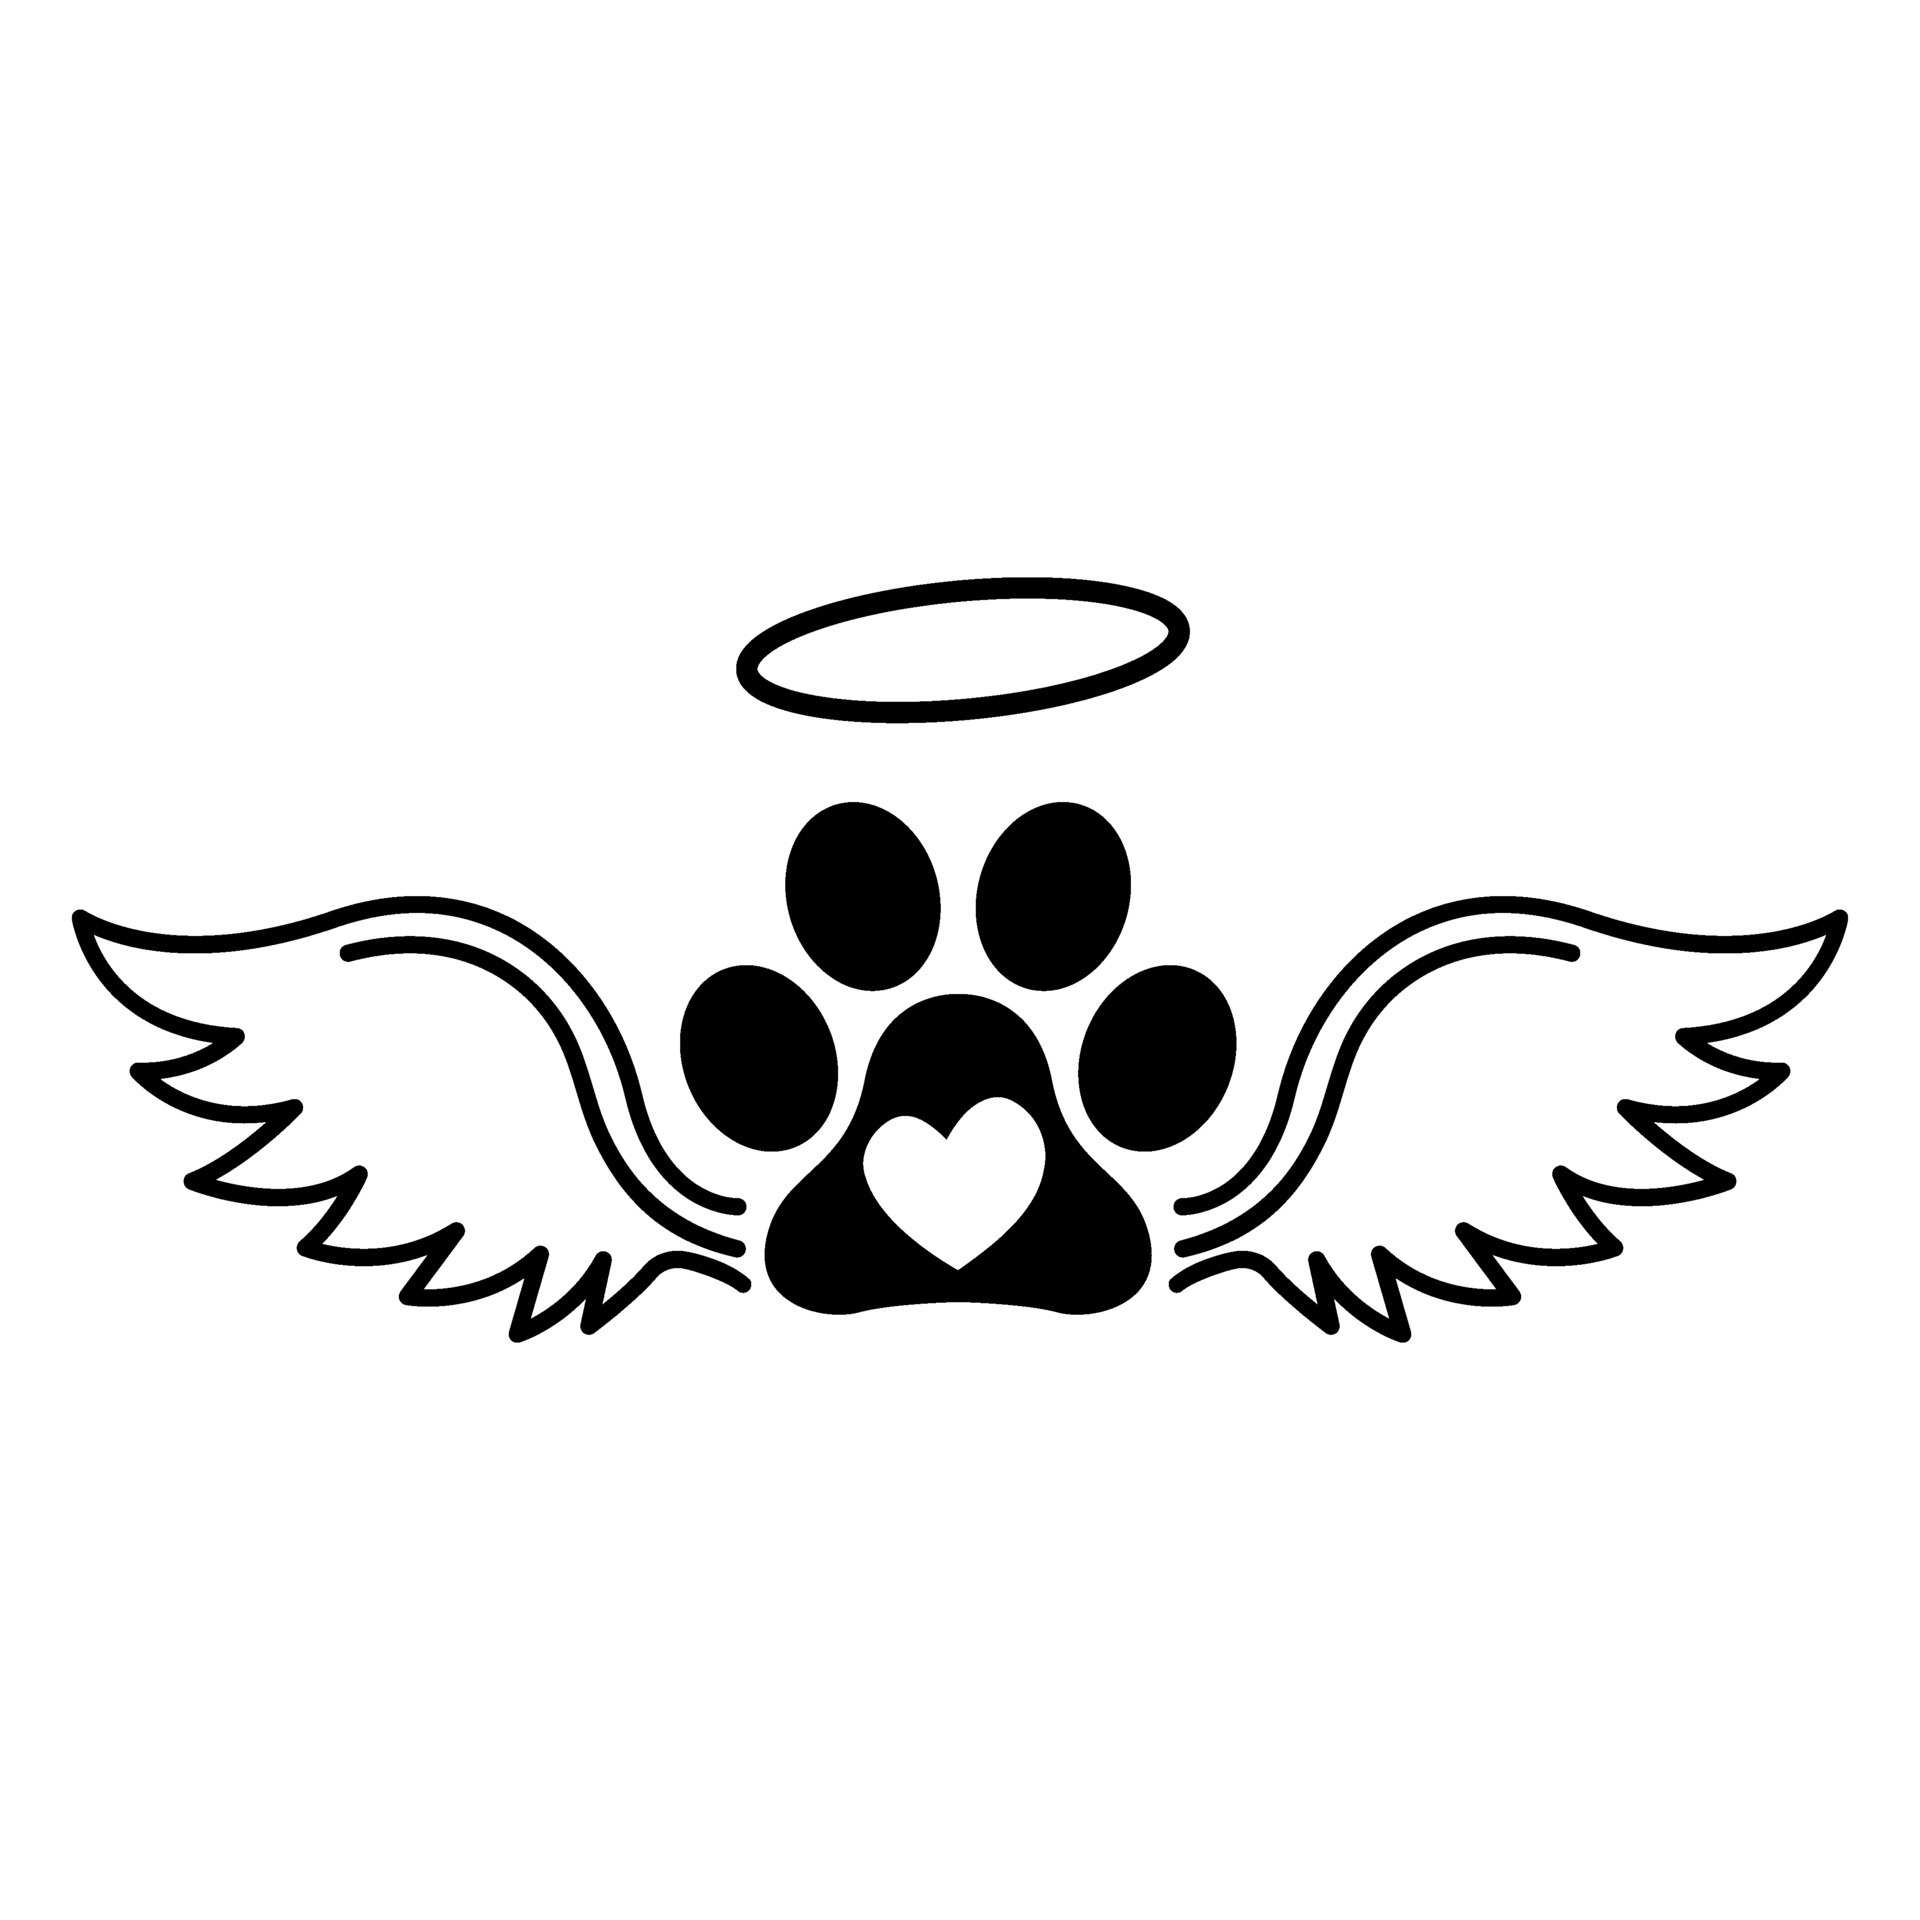 Dog with wings icon vector. angel illustration sign. wings symbol